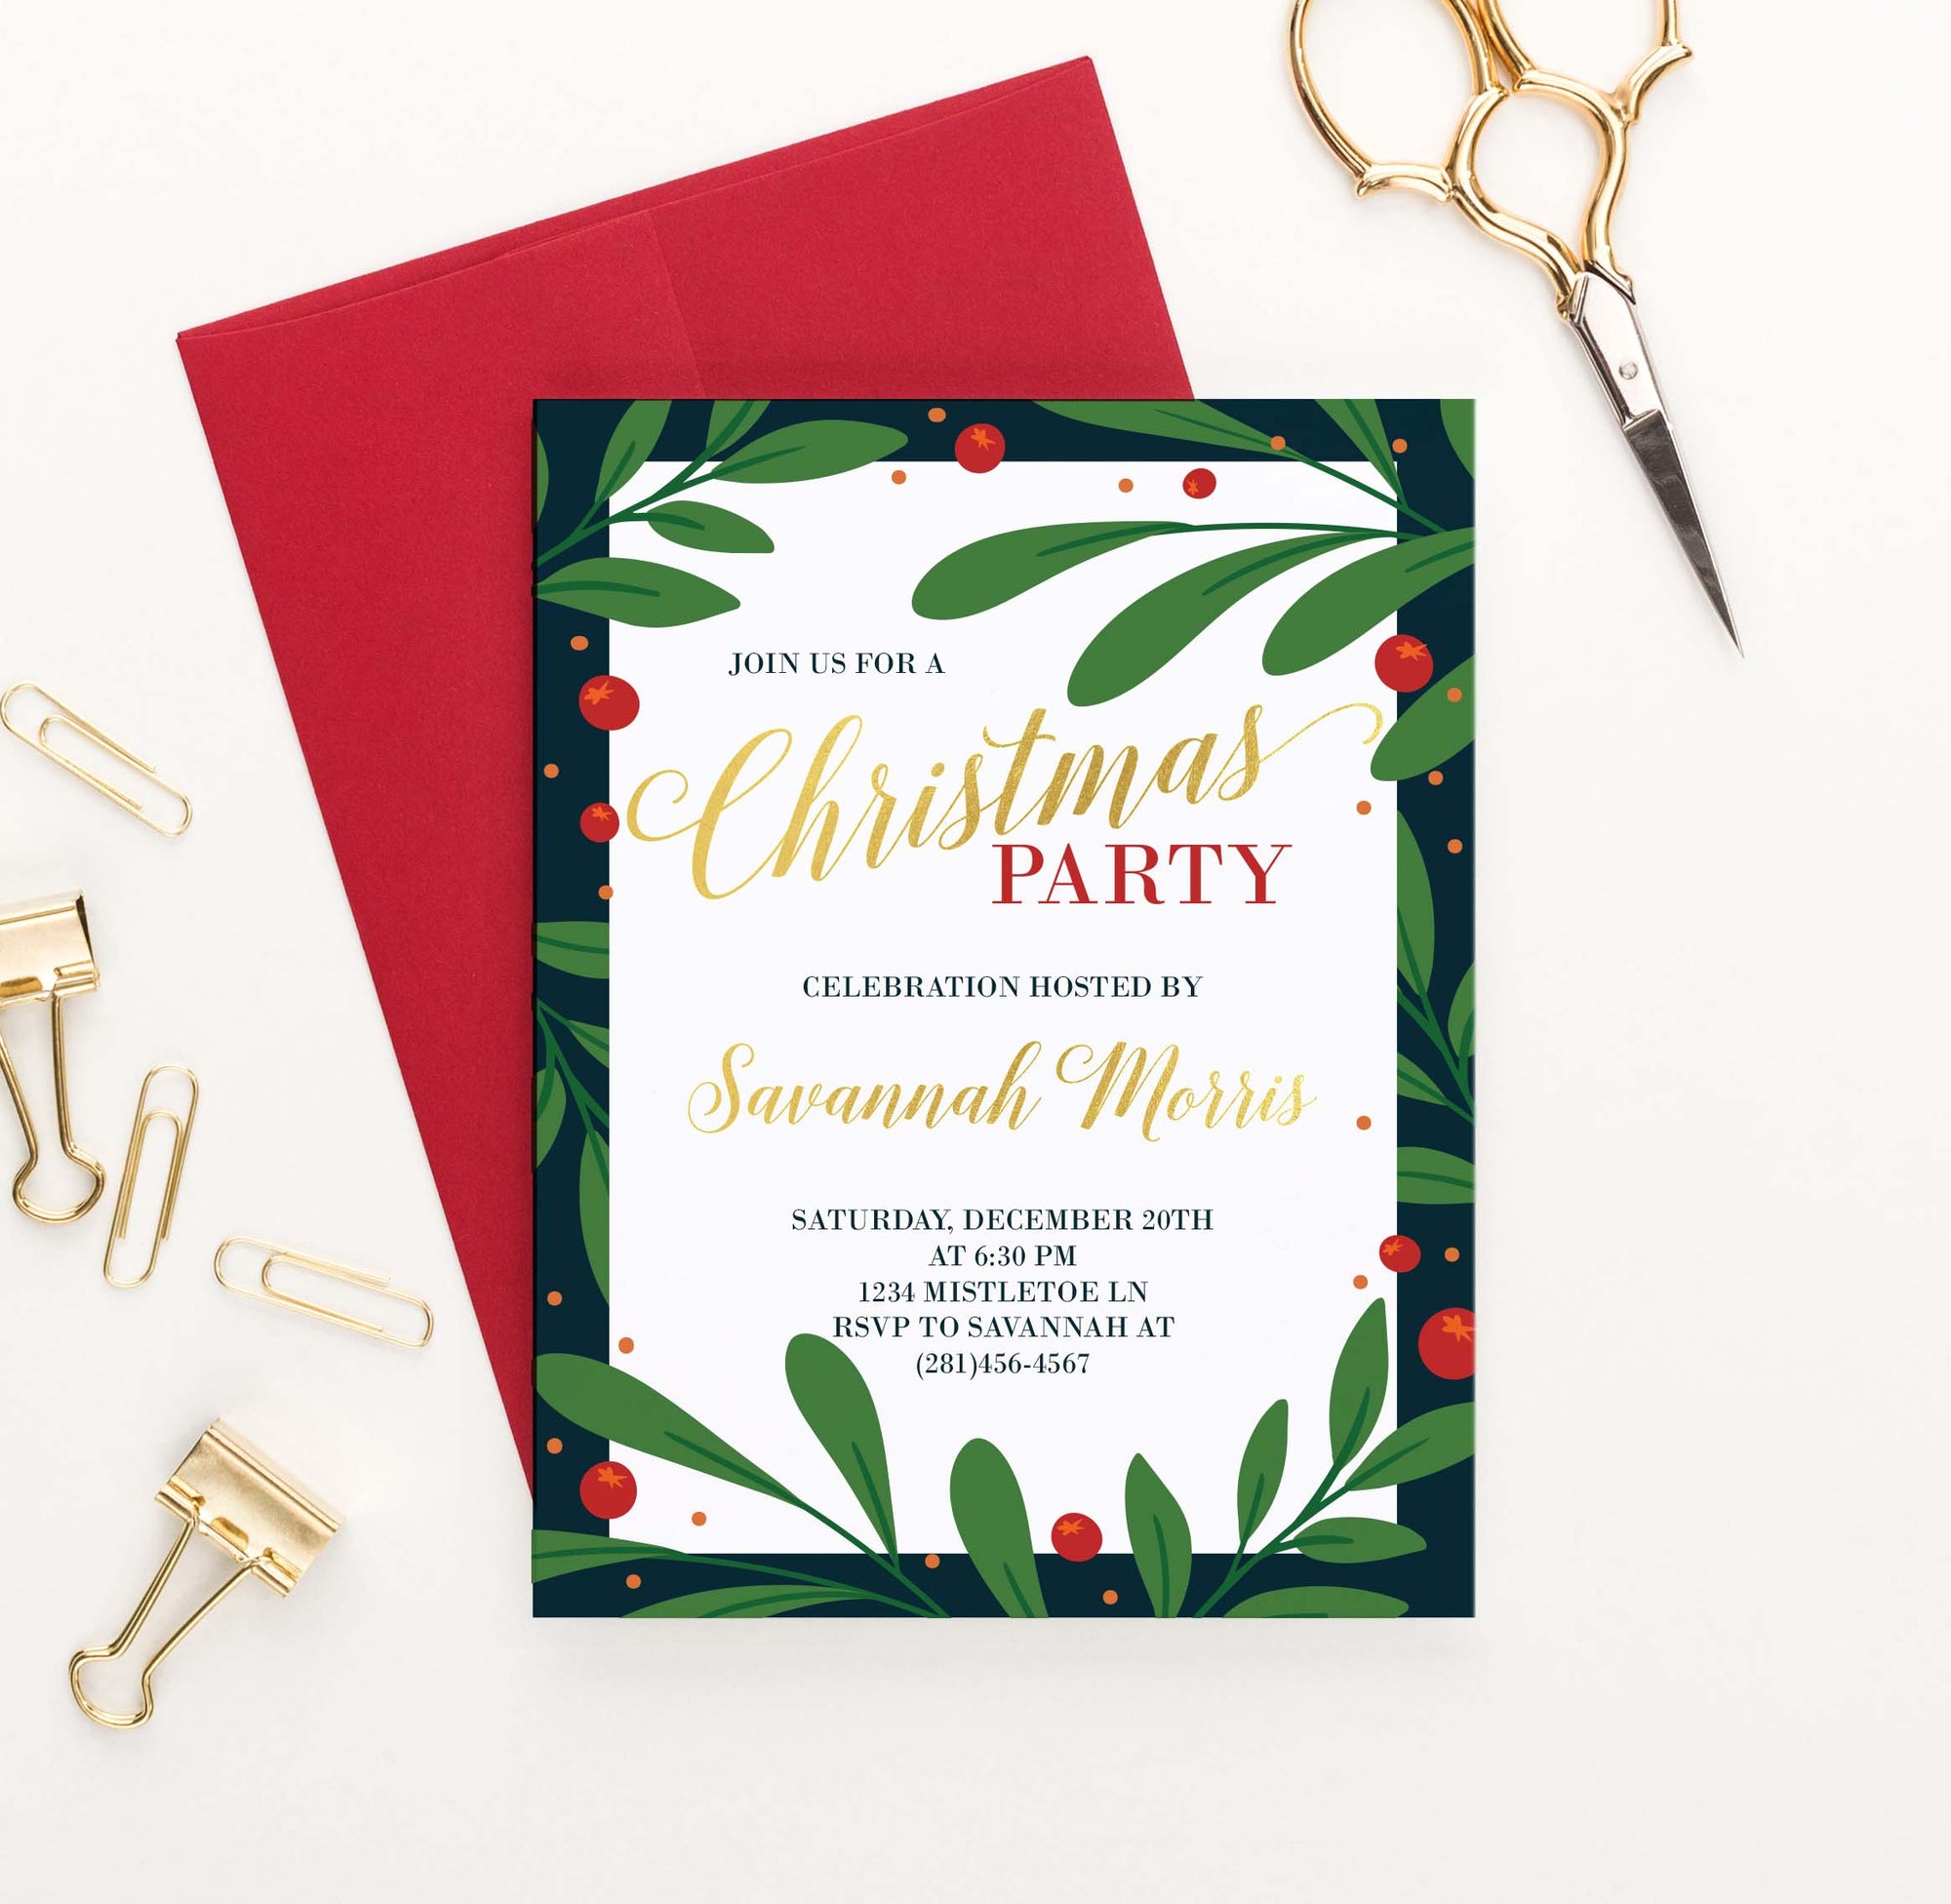 CPI006 elegant holly framed holiday party invitations personalized christmas merry